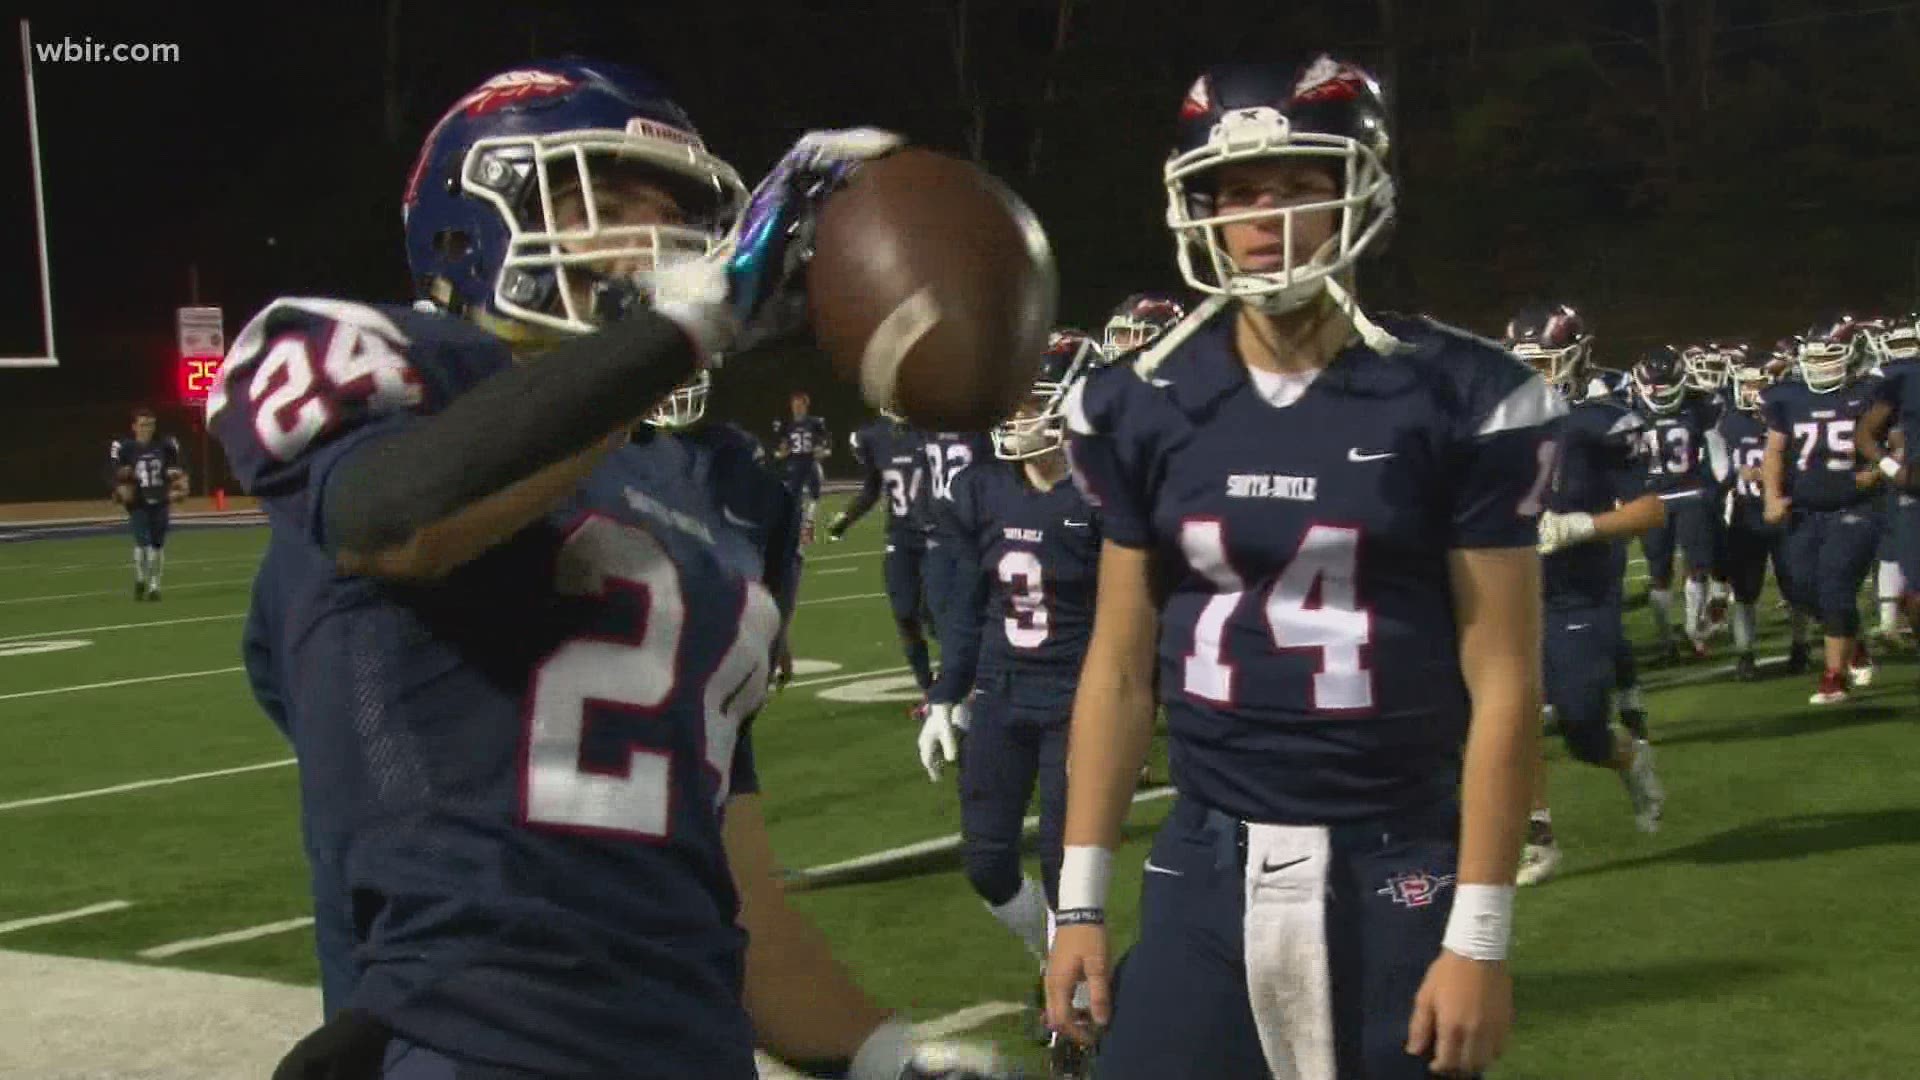 South-Doyle beats Daniel Boone in the first round of the playoffs.